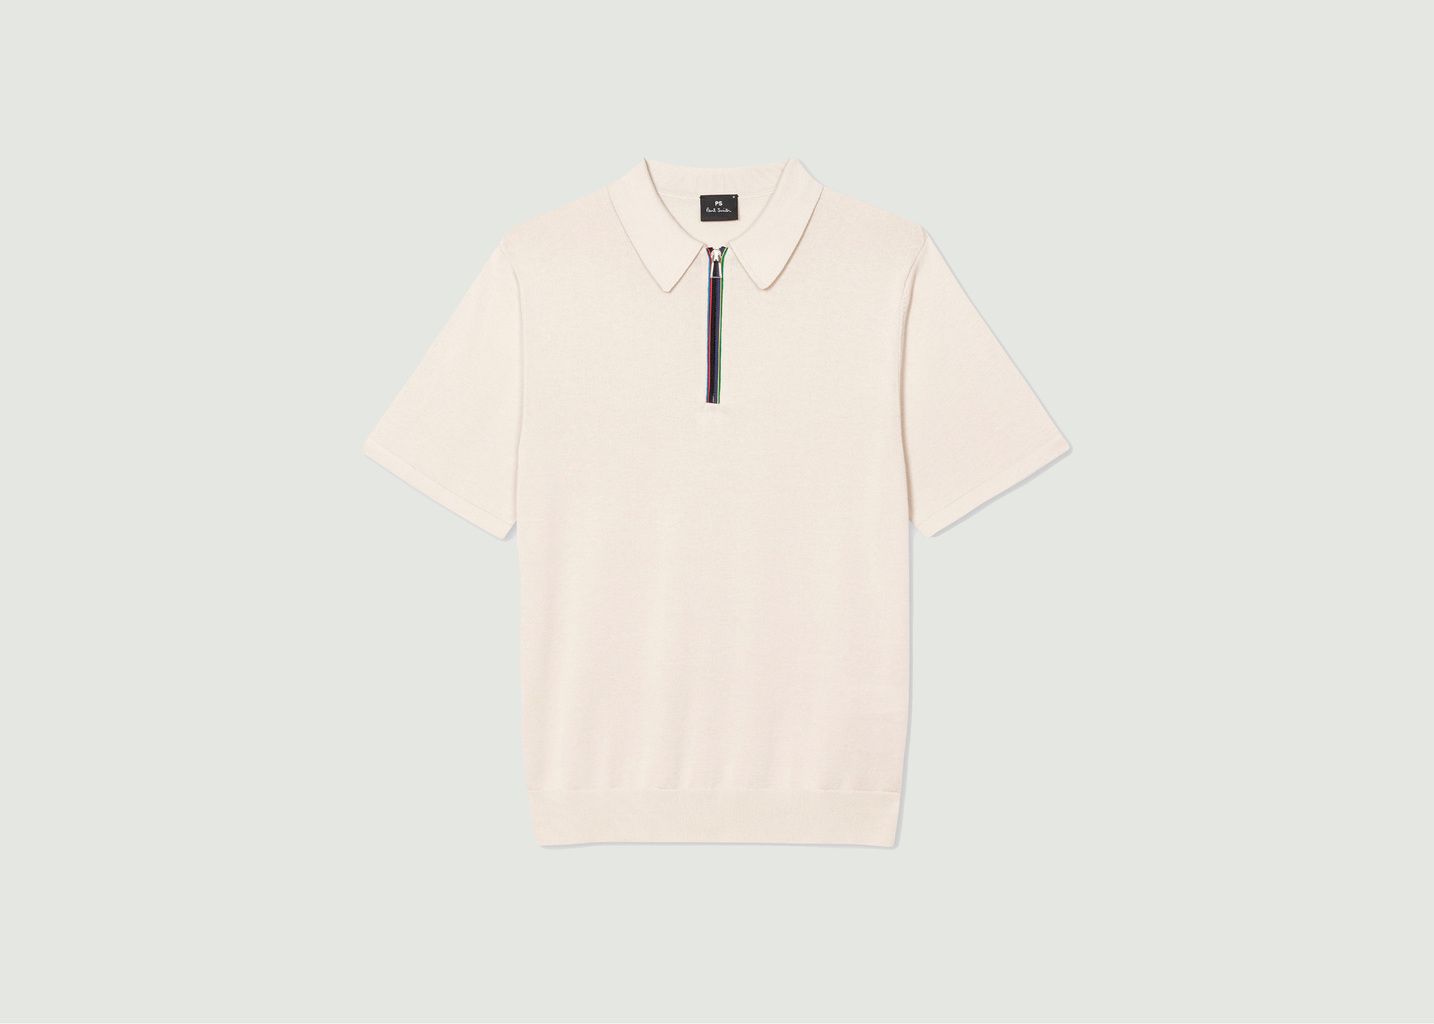 PS by Paul Smith Zip Neck Polo